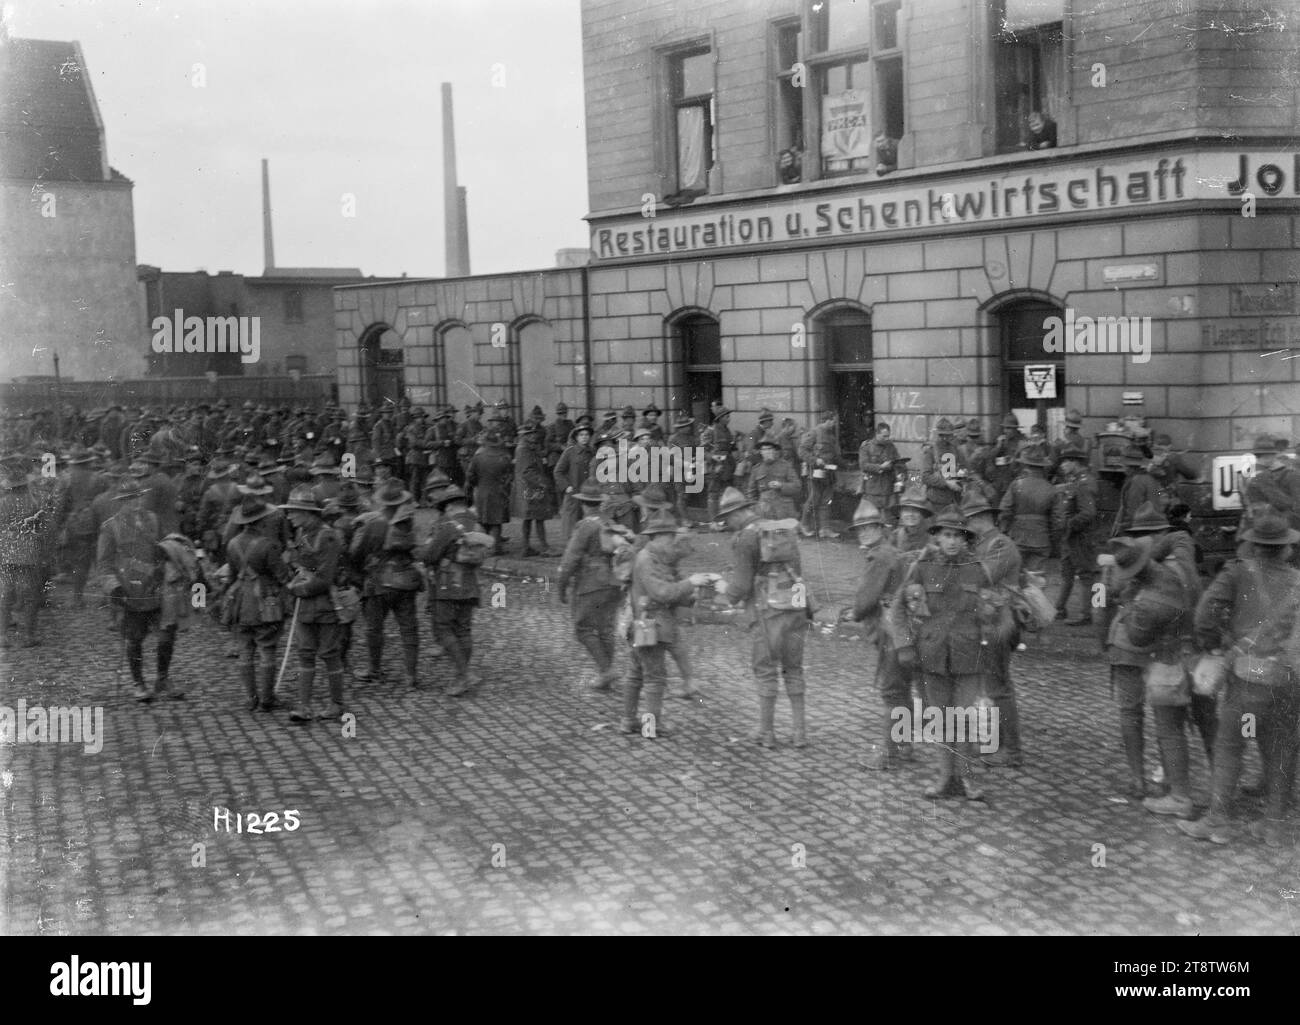 World War I New Zealand troops outside the YMCA in Ehrenfeld, Cologne, A large group of New Zealand soldiers shown mingling on the cobblestones outside the NZ YMCA in Ehrenfeld, a suburb of Cologne in Germany. YMCA notices appear on the window of a building with the German words 'Restauration u. Schenkwirtschaft' on it. 'NZ YMCA' is also written on the wall. Photograph taken after the end of World War I, probably December 1918 Stock Photo